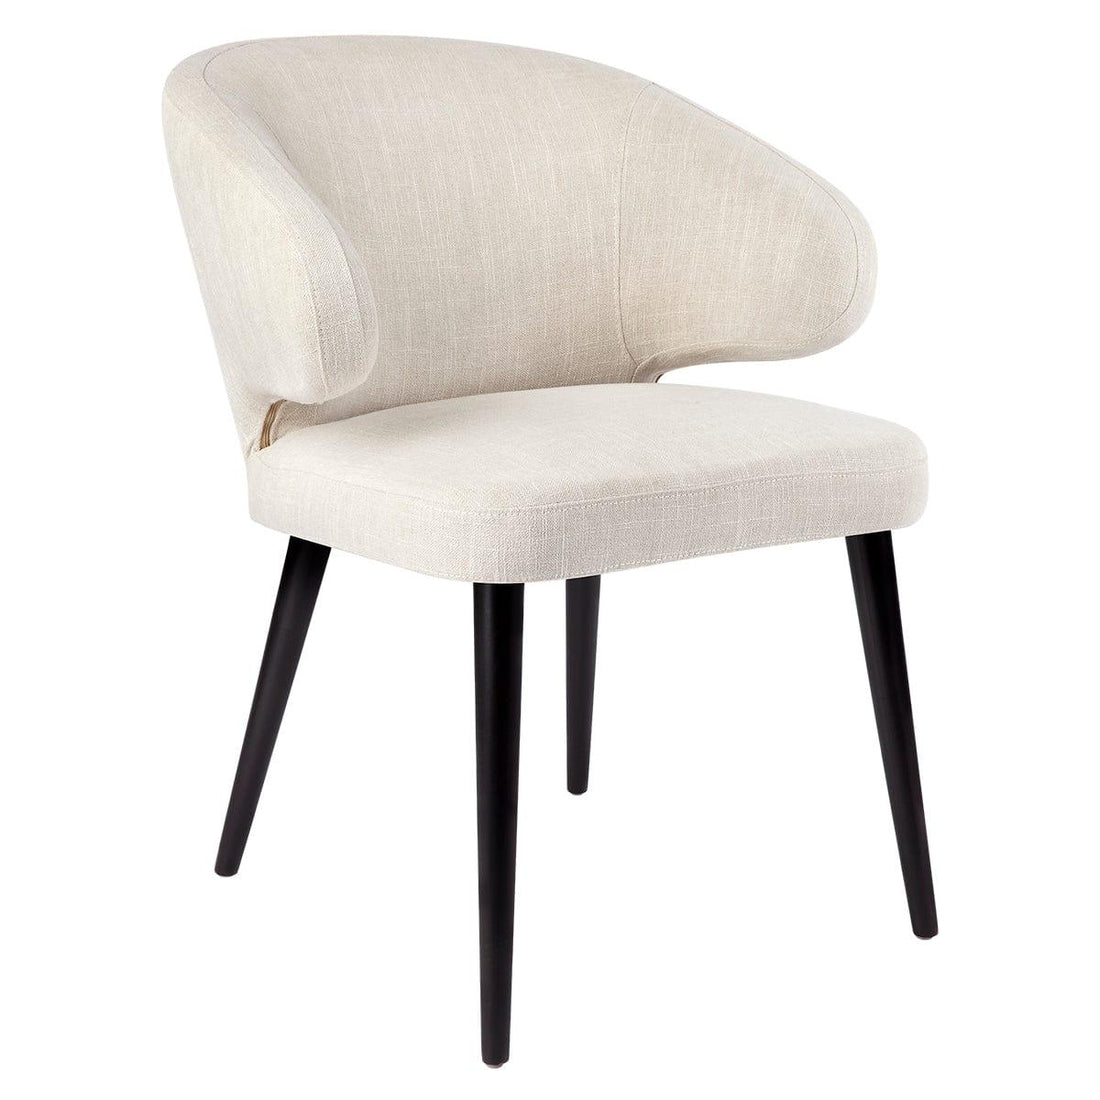 House Journey Harlow Black Dining Chair - Natural Linen